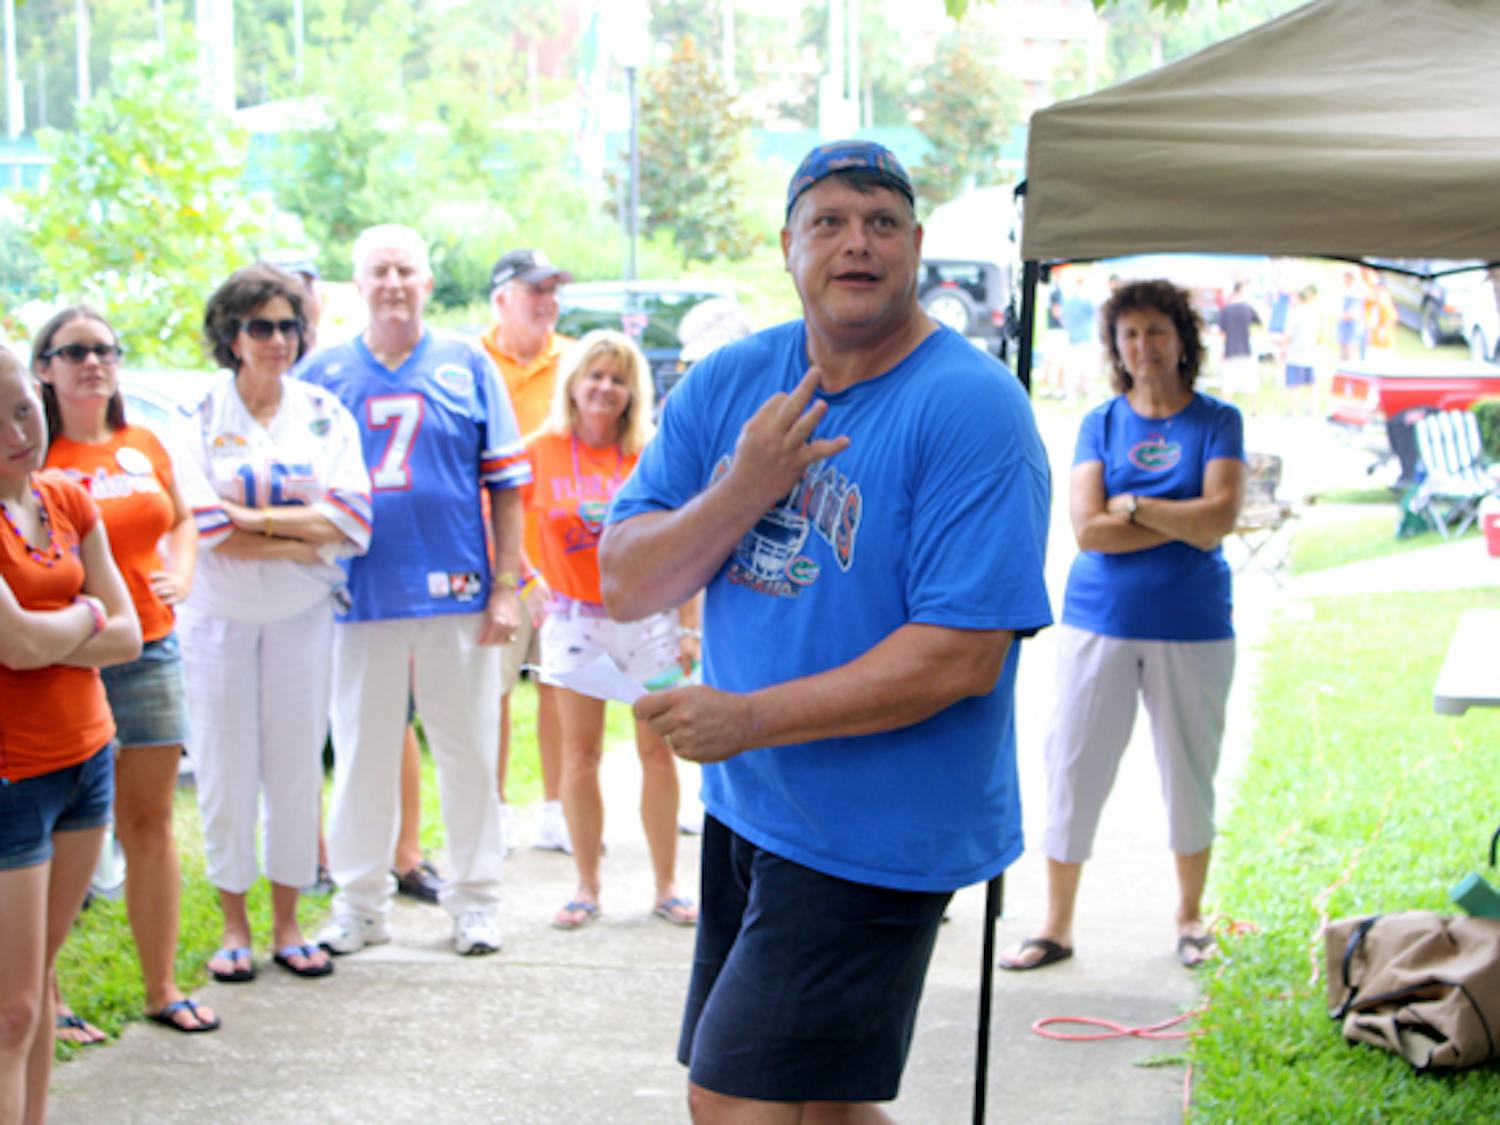 Anthony "Gator Tony" Burke has become a quintessential gameday figure on campus, giving toasts to pump up tailgaters before every home game.